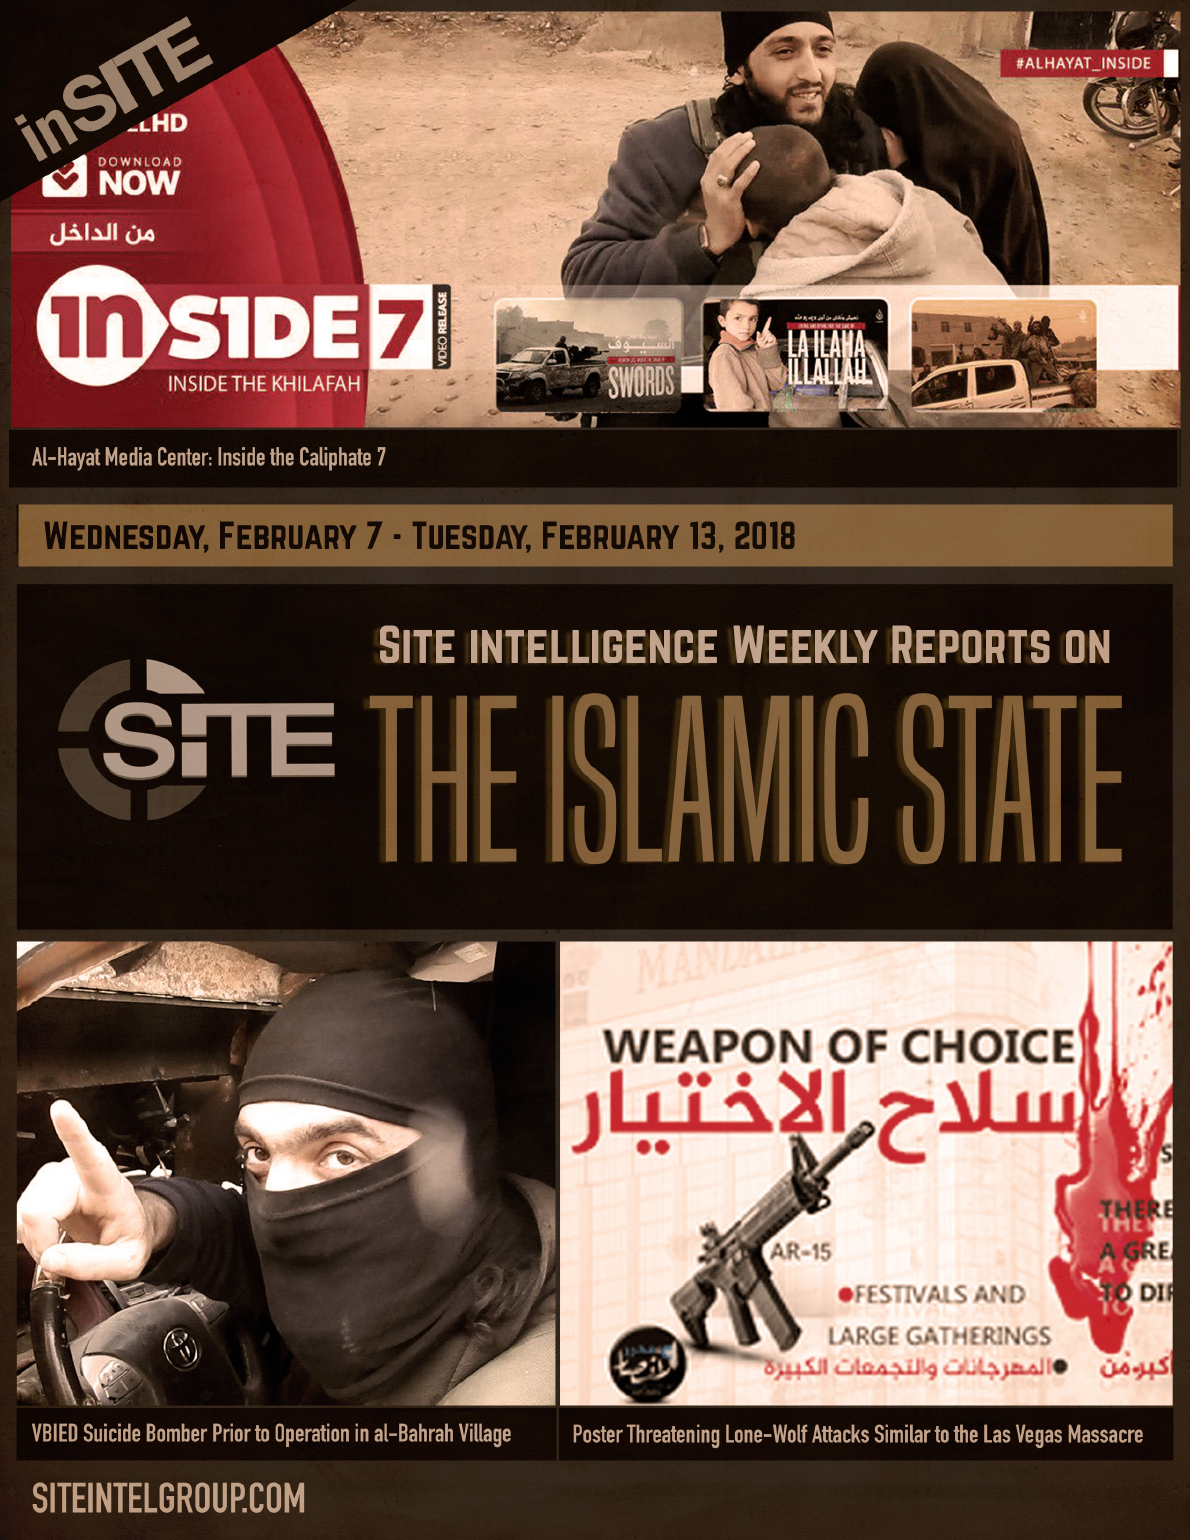 Weekly inSITE on the Islamic State, February 7-13, 2018